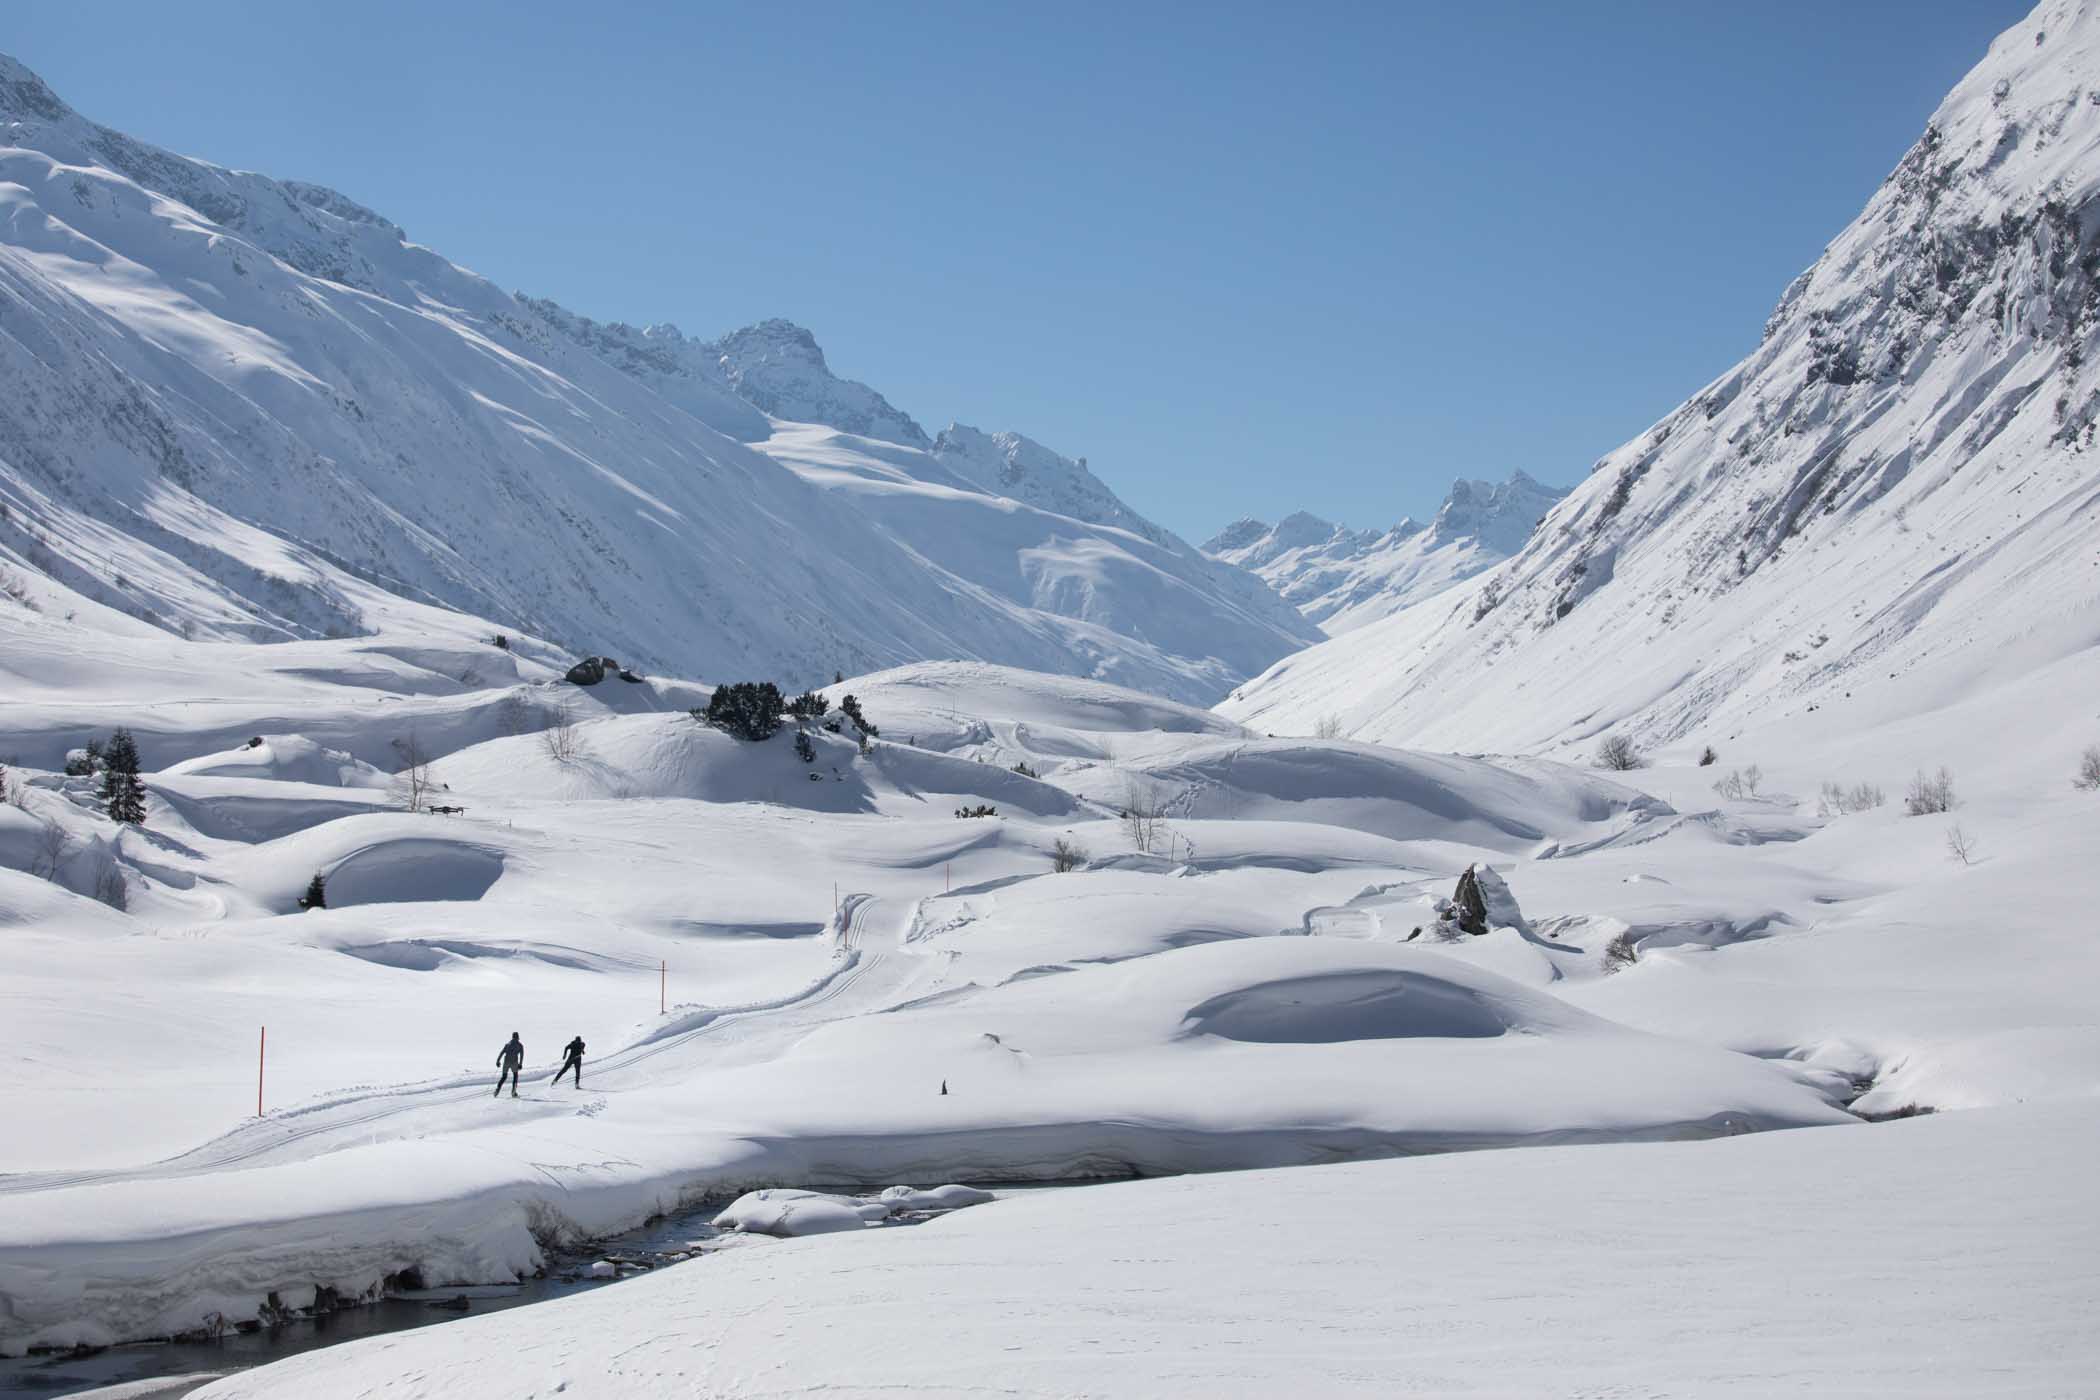 a snowy valley with a cross-country track running through, two skiers on the move